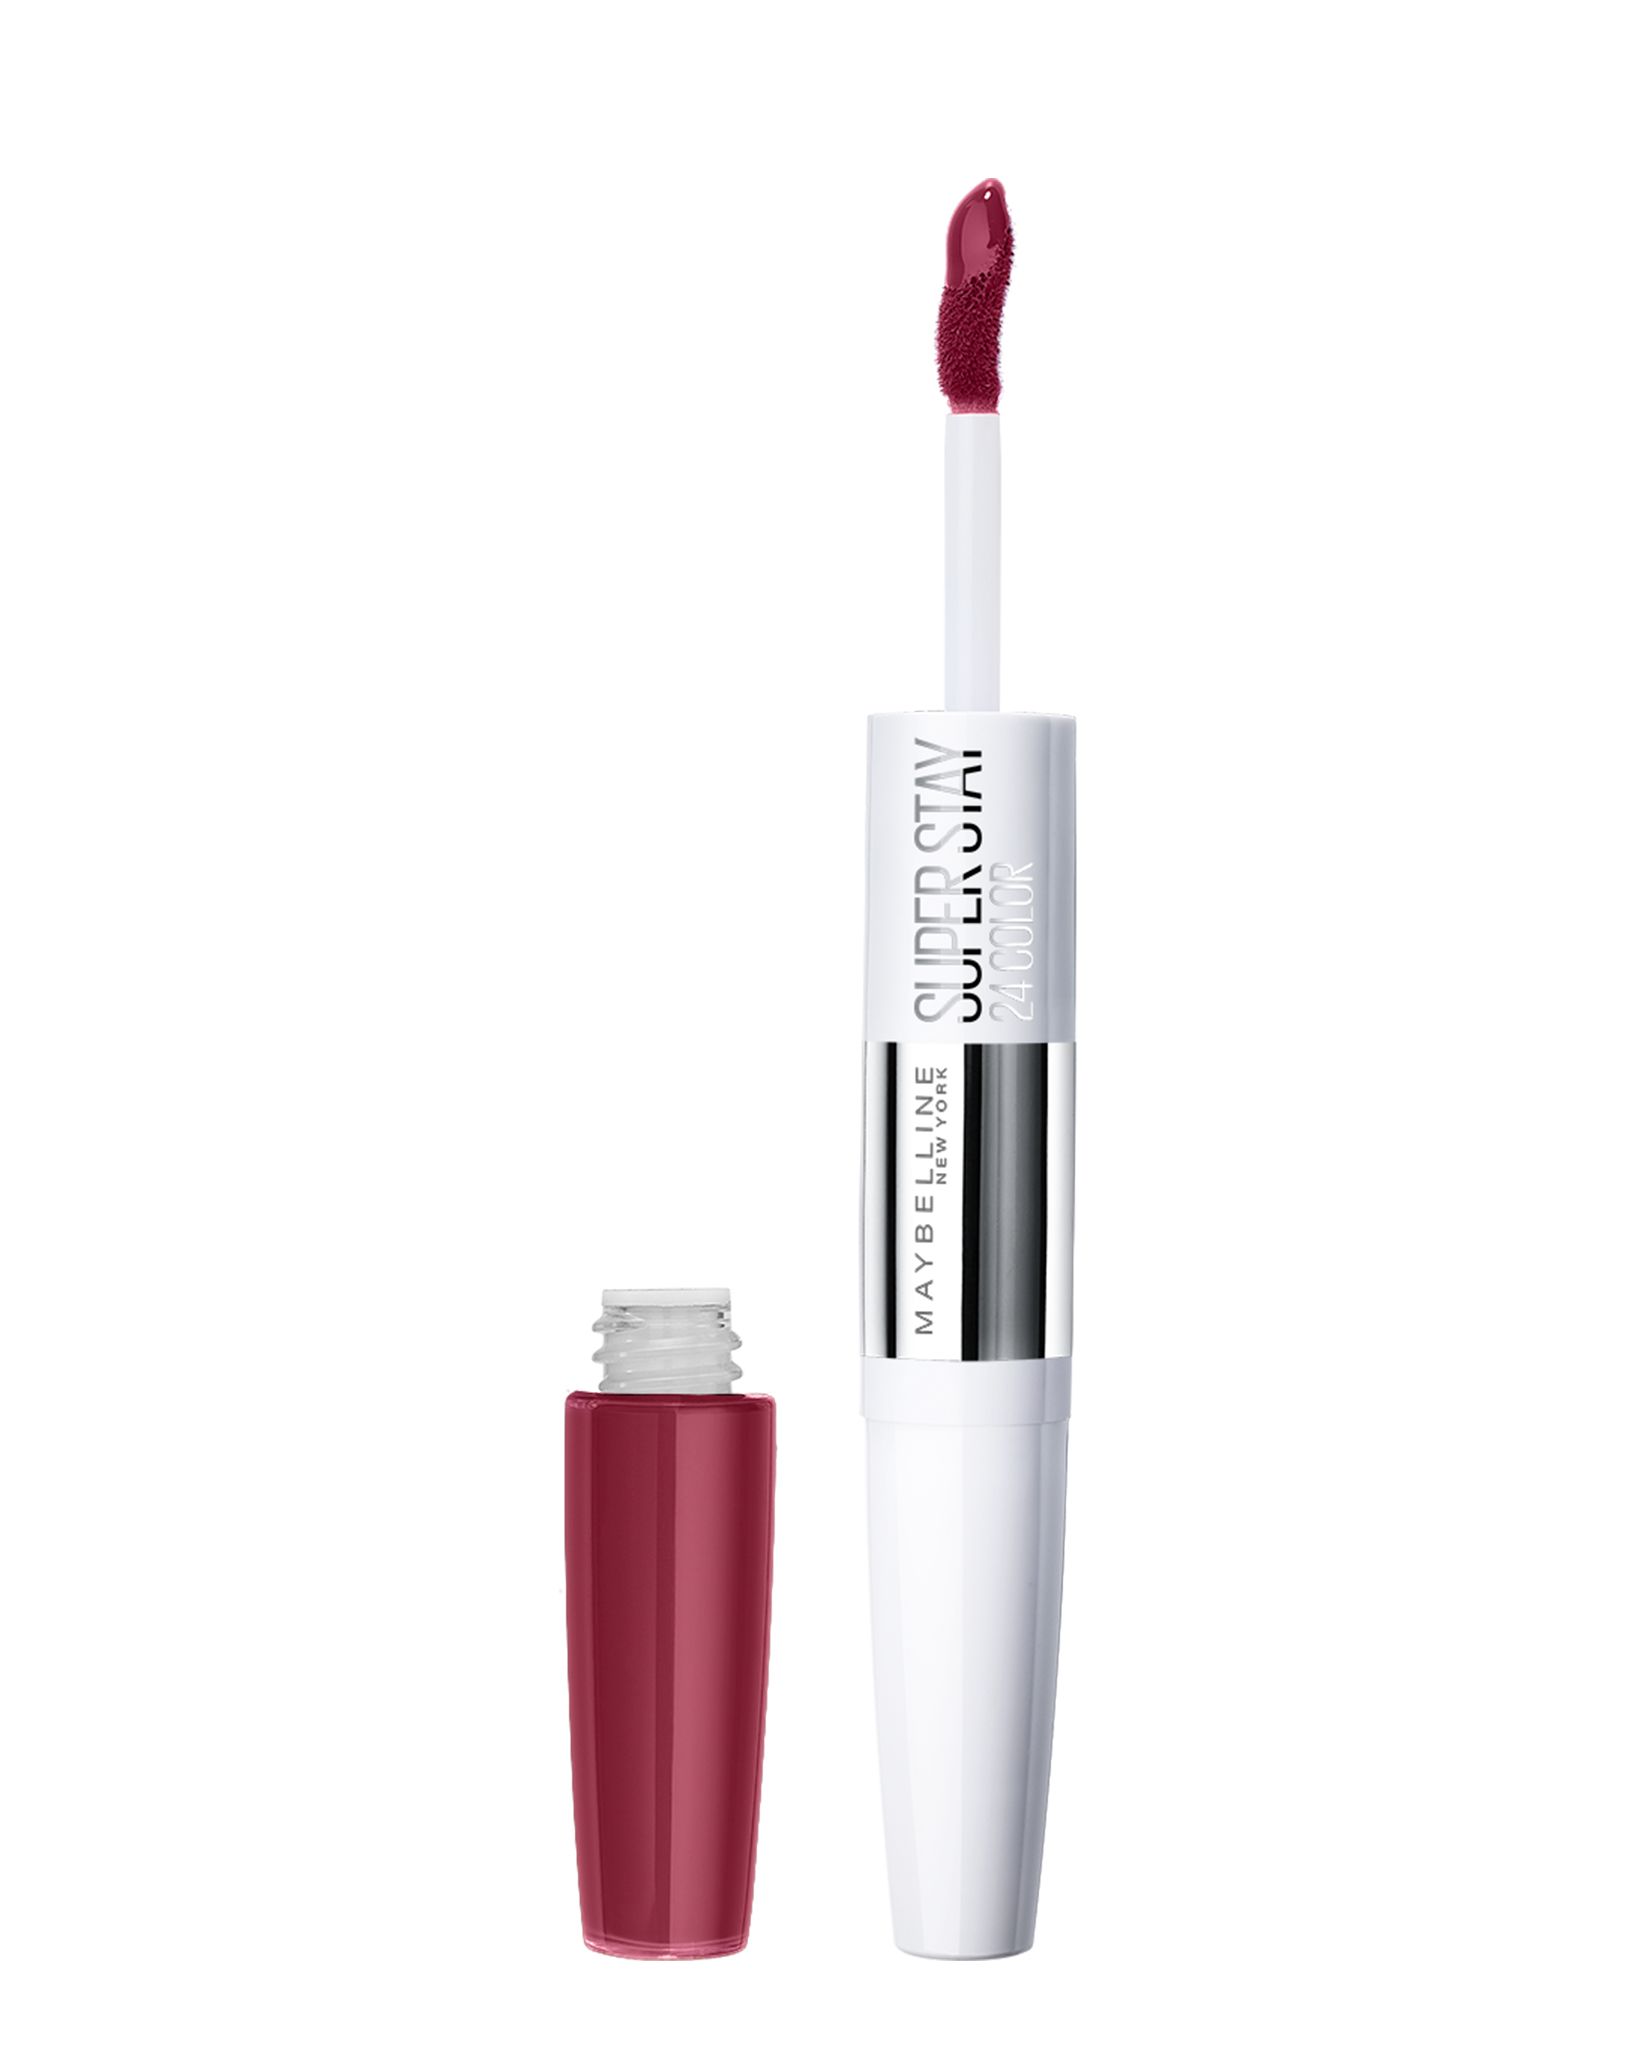 Labios Superstay 24H 195 MAYBELLINE, pack 1 unid.